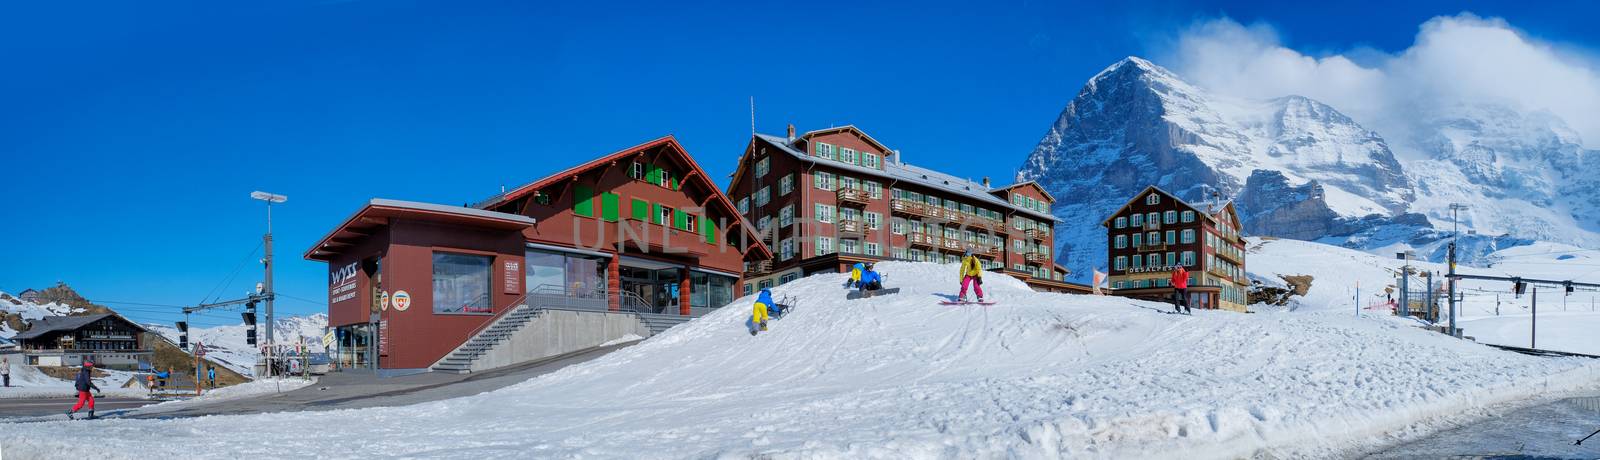 KLEINE SCHEIDEGG - 27 MARCH : Train and hotel at Kleine Scheidegg, Switzerland on March 27, 2017. Kleine Scheidegg is a famous mountain pass attracting many tourists come to playing ski each year.